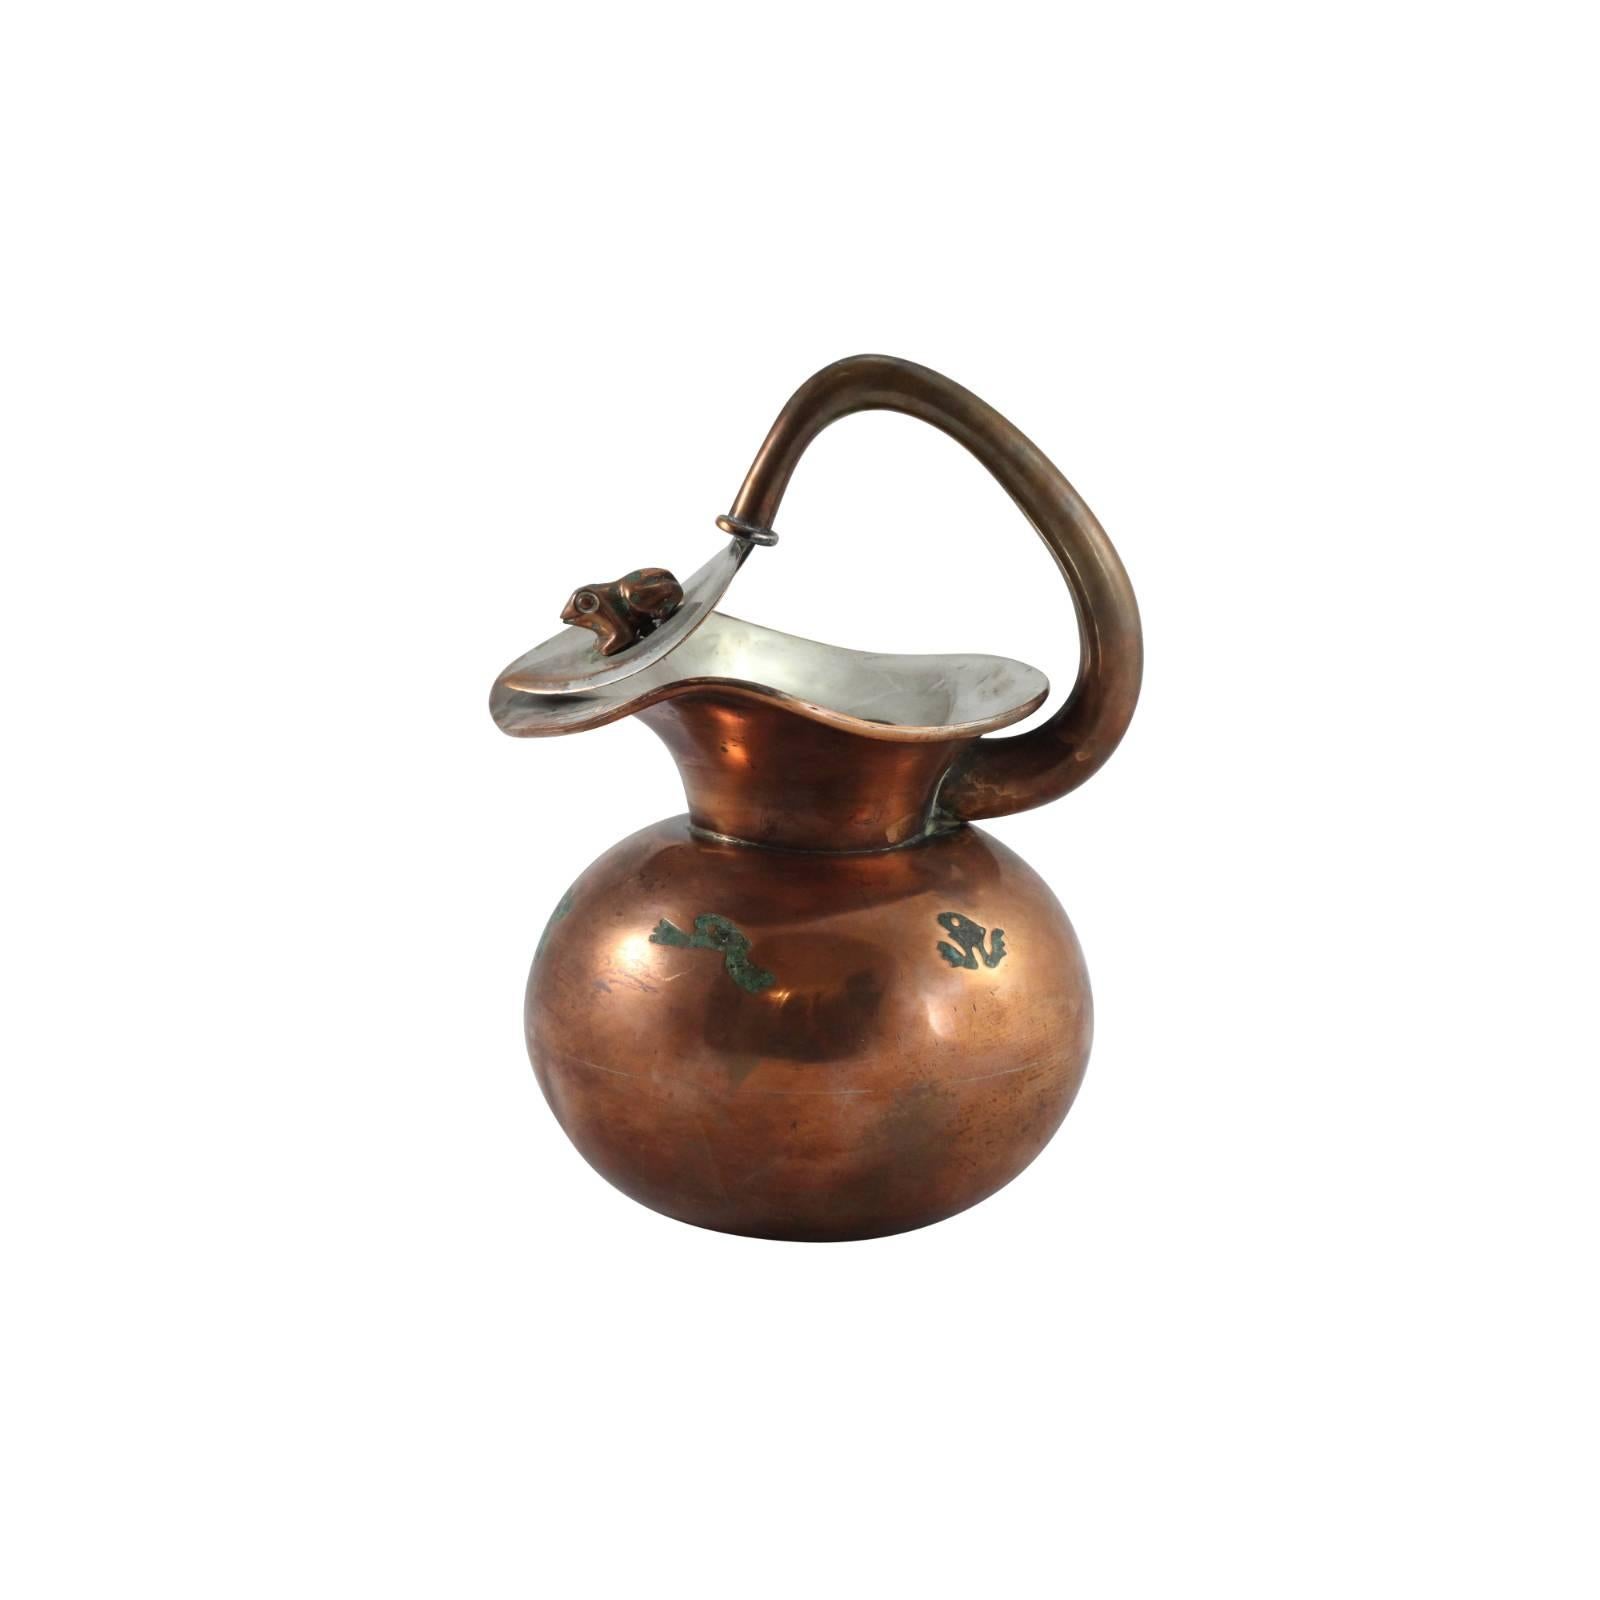 This Mexican pitcher by Chato Castillo, Taxco is sure to be a unique addition to your collection. With its distinct Mexican design in copper and brass with curious malachite frog details, it may be the perfect thing for your upcoming garden party